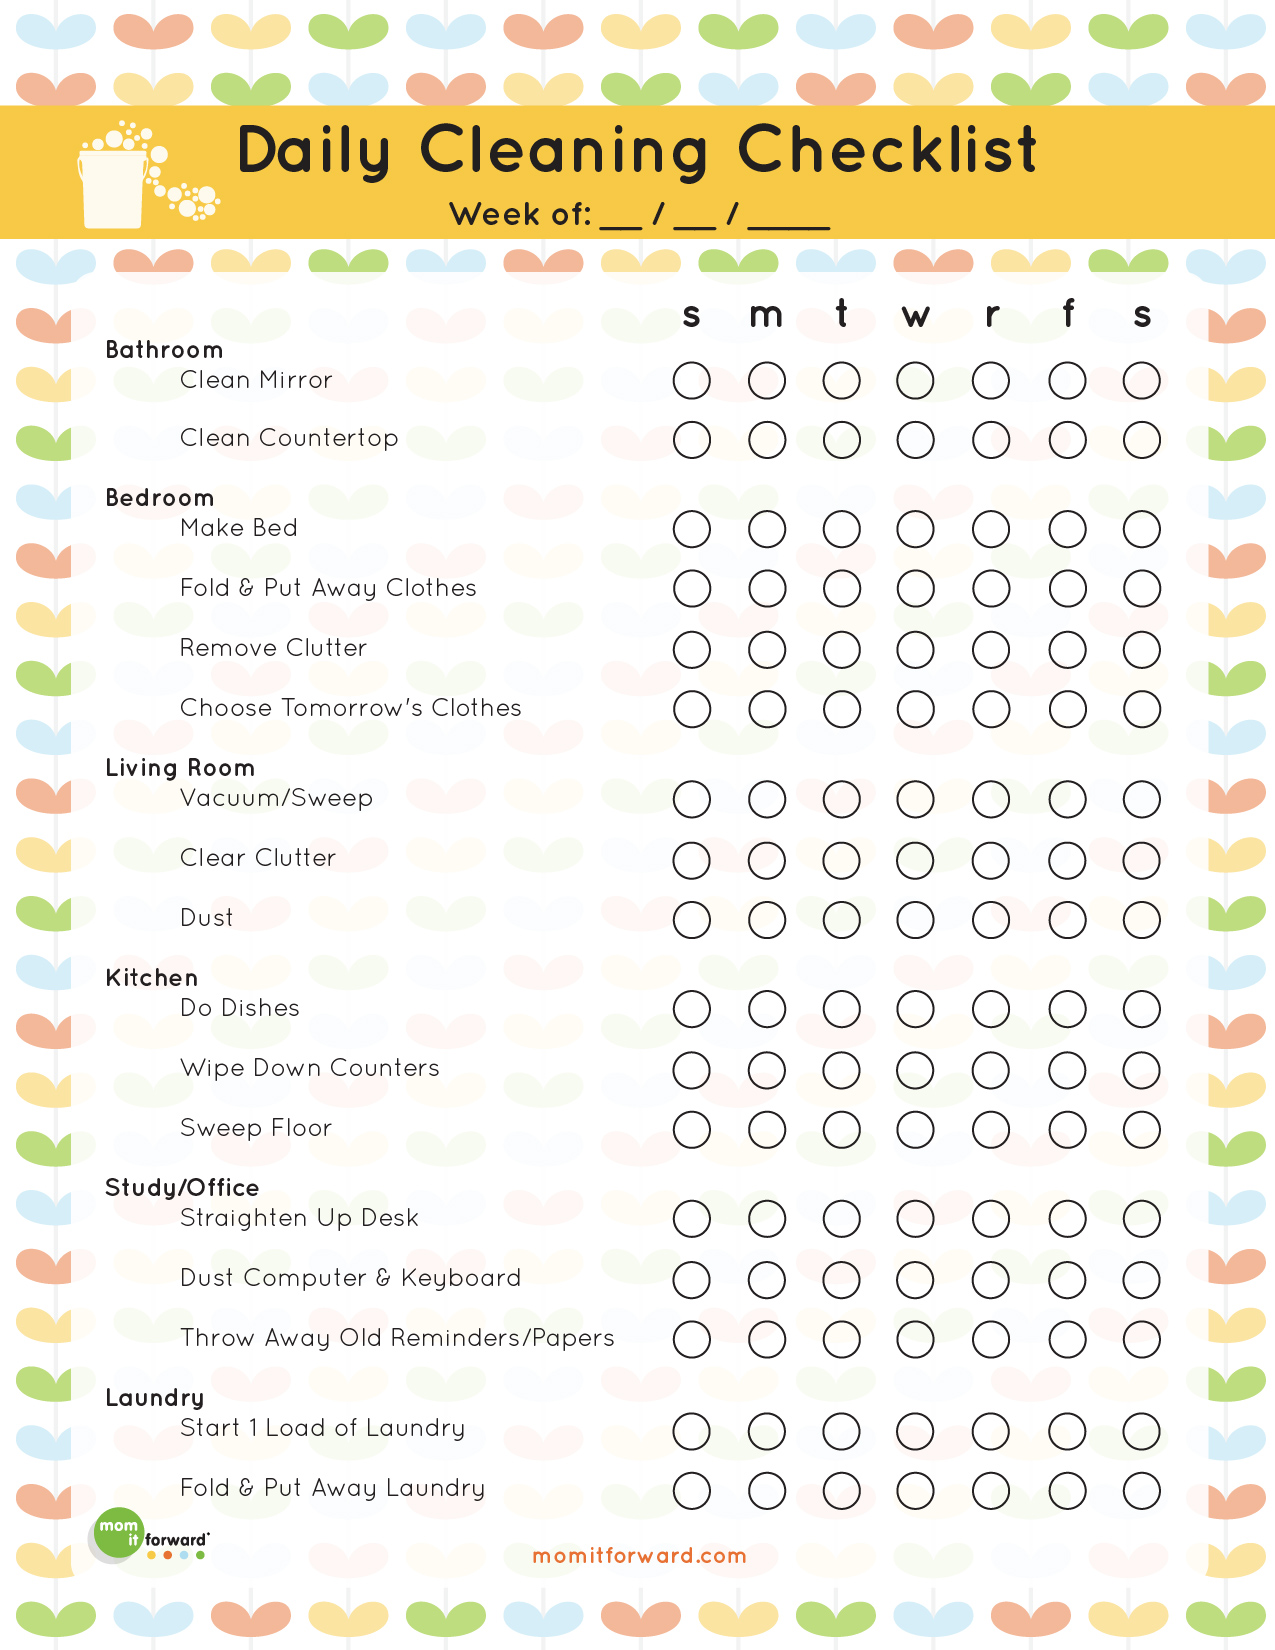 janitorial-cleaning-checklist-template-qualads